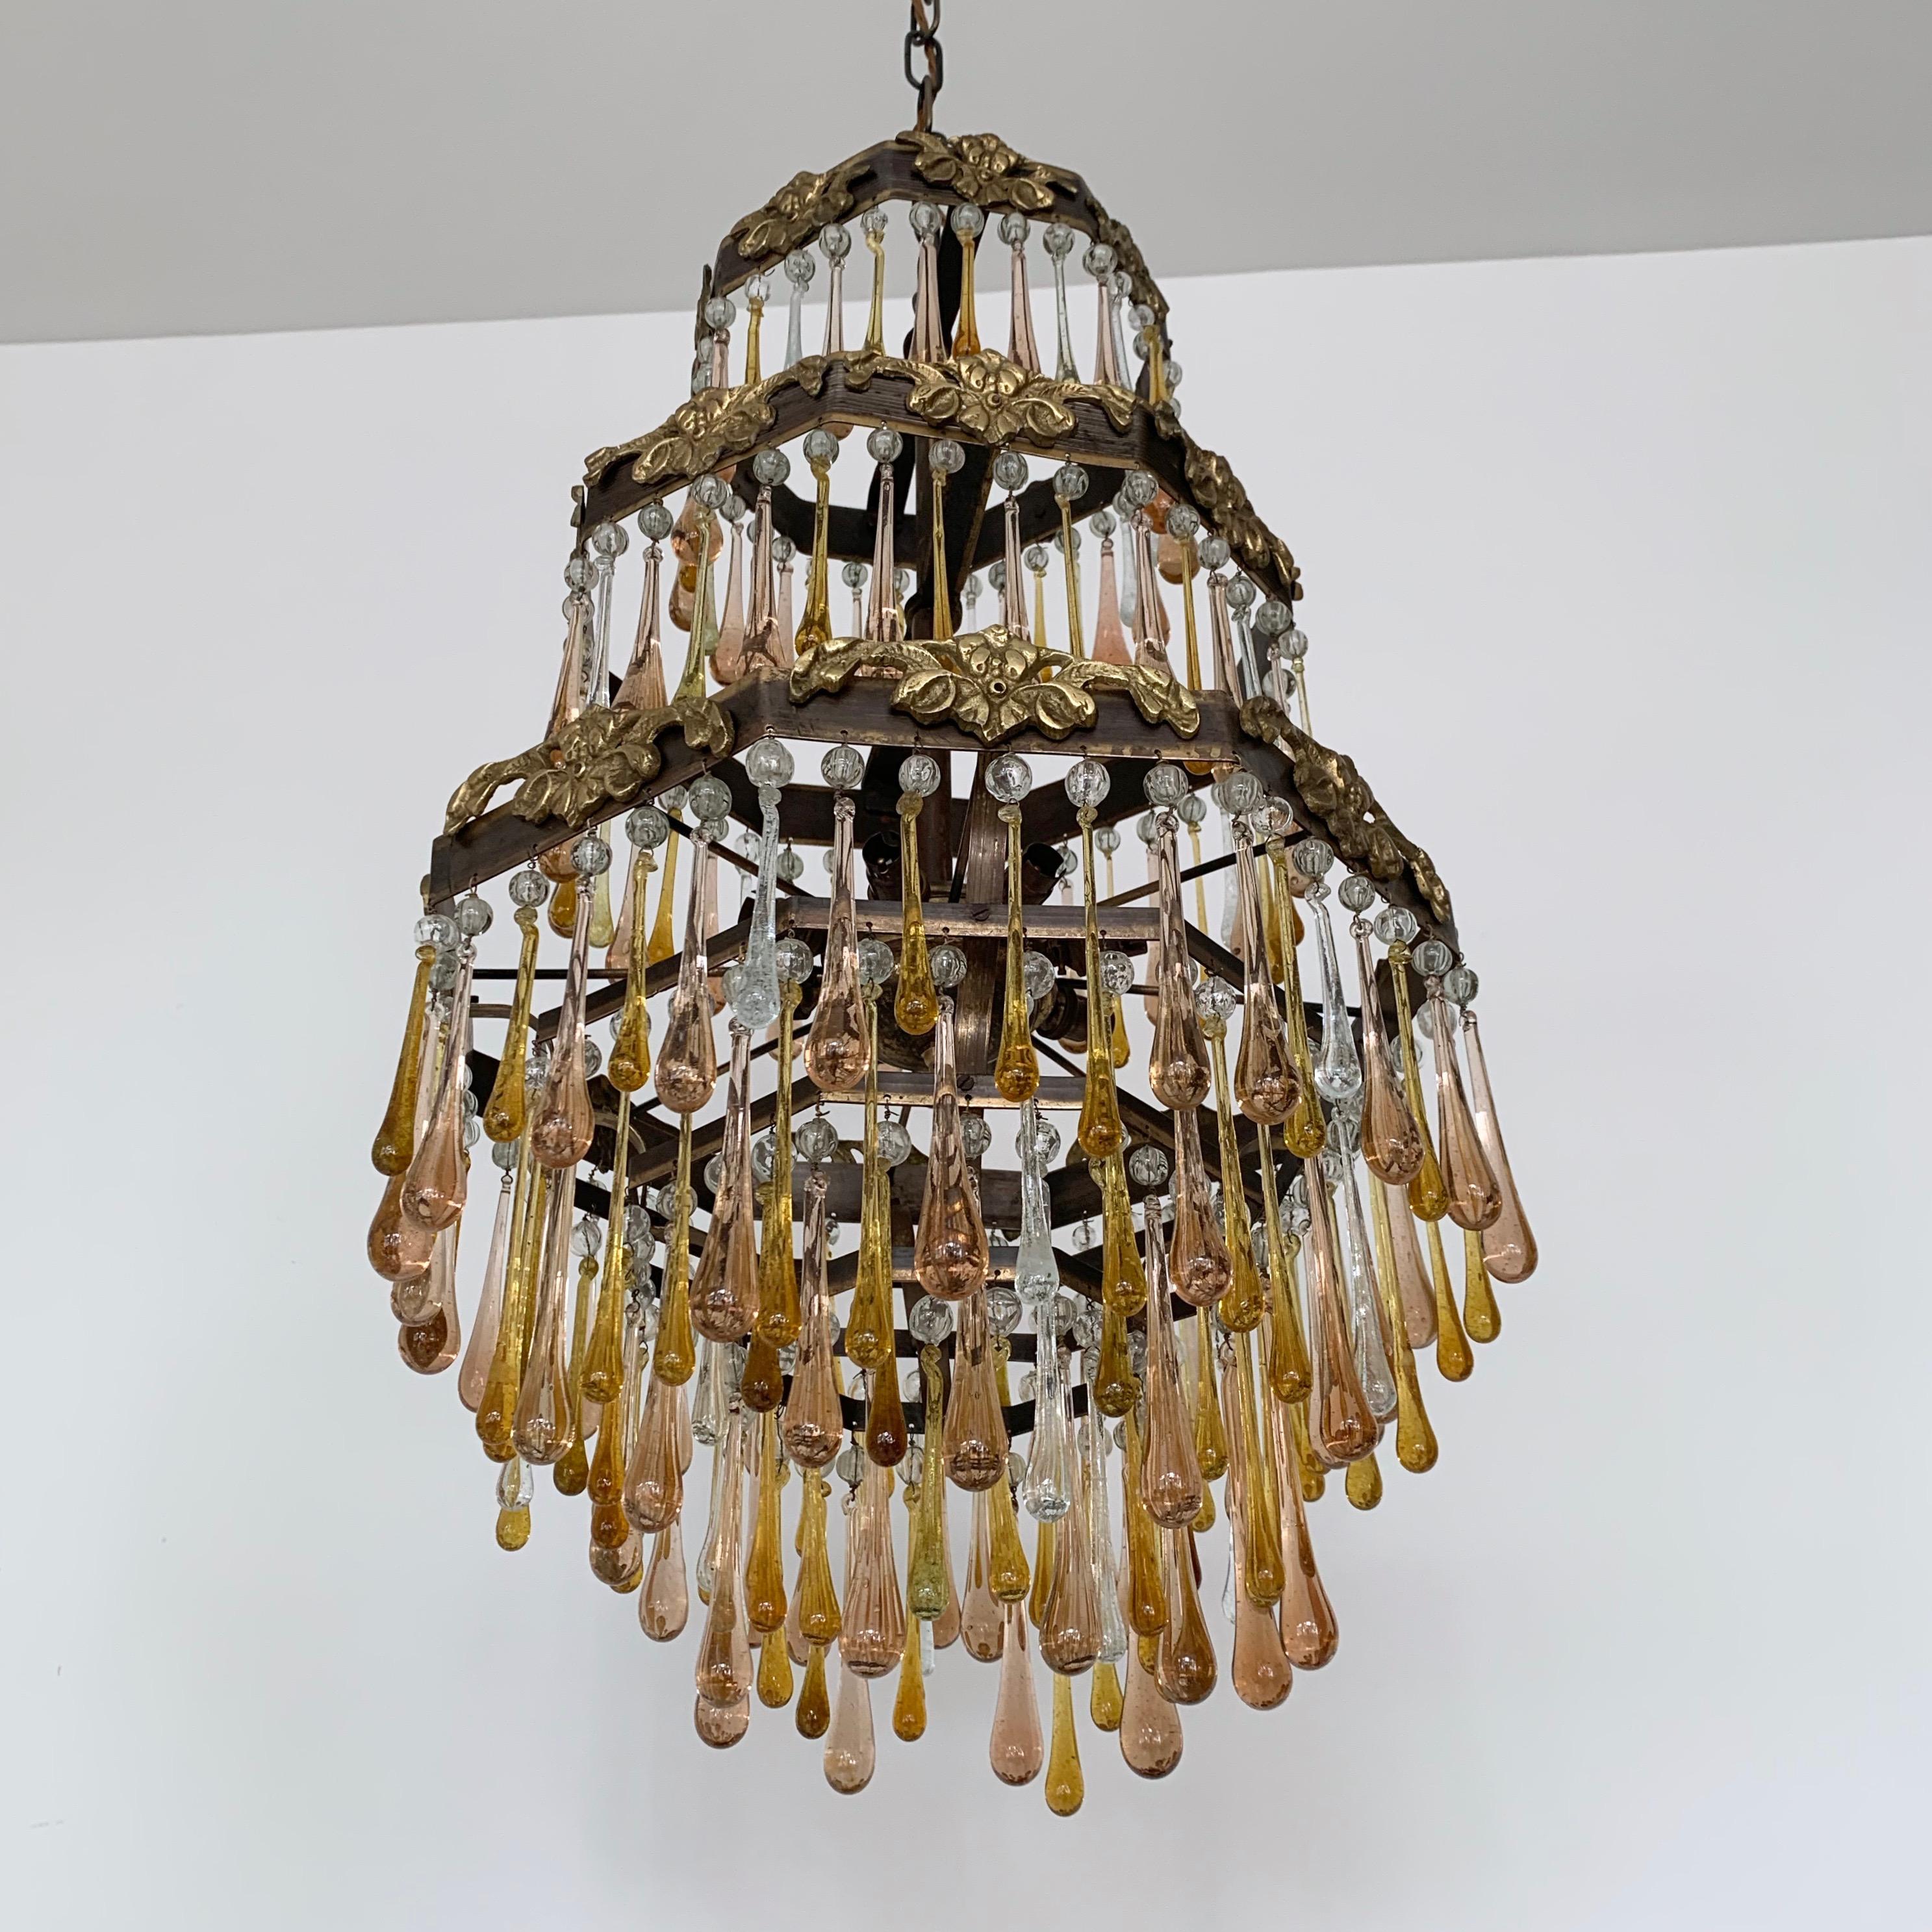 Early 1900s French Brass Waterfall Chandelier Frame Dressed in Peach and Amber For Sale 1